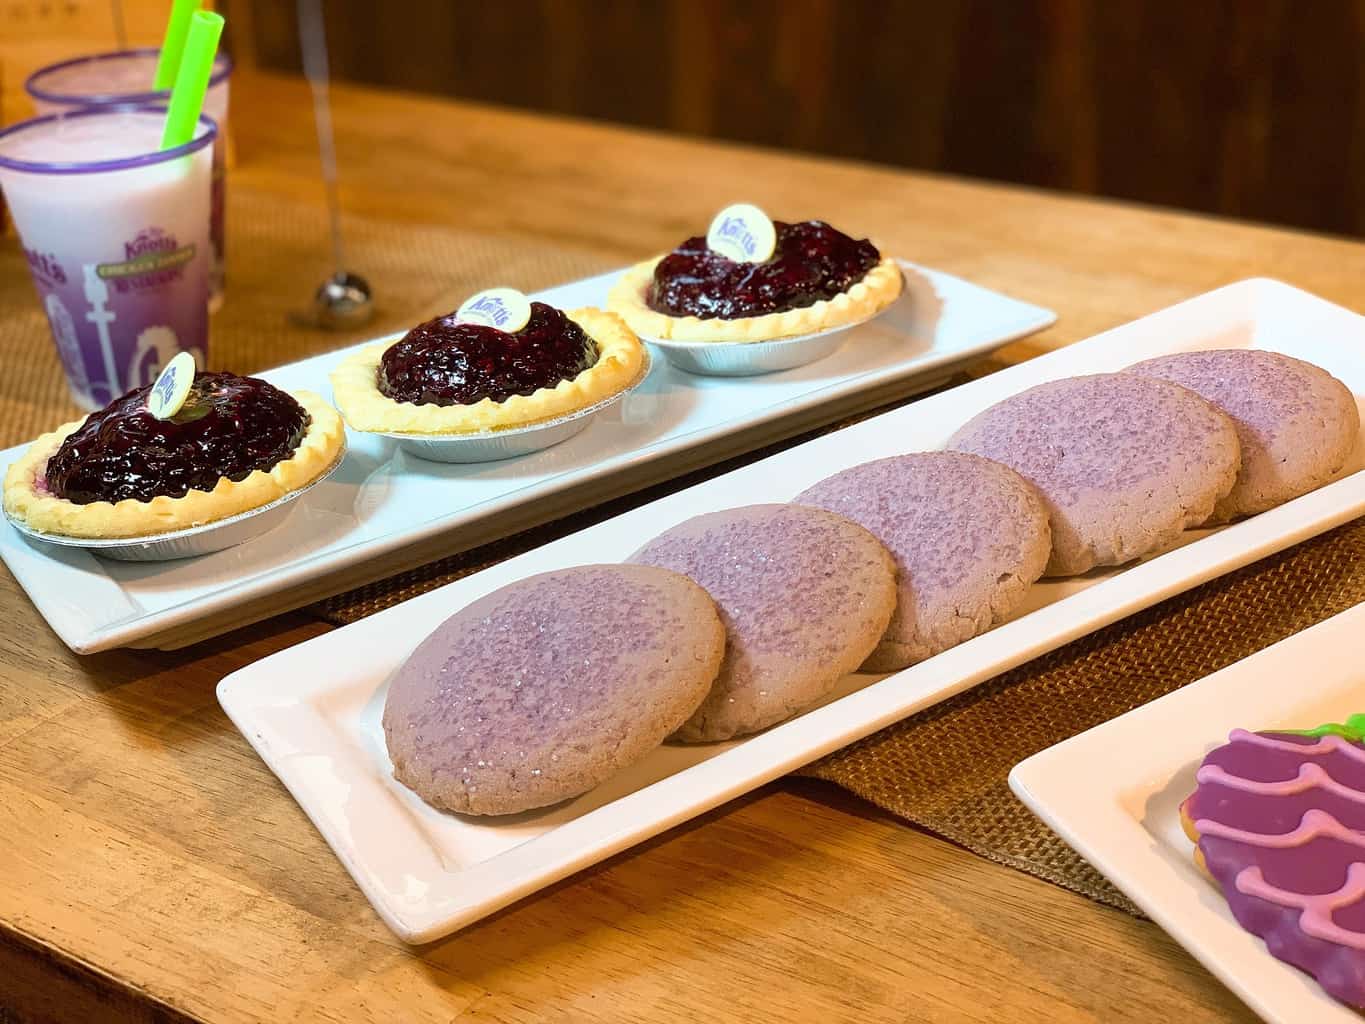 From endless boysenberry food pairings to boysenberry photo ops to a highly contentious boysenberry pie-eating contest, there is something for everyone at the Knott's Boysenberry Festival in Buena Park. 